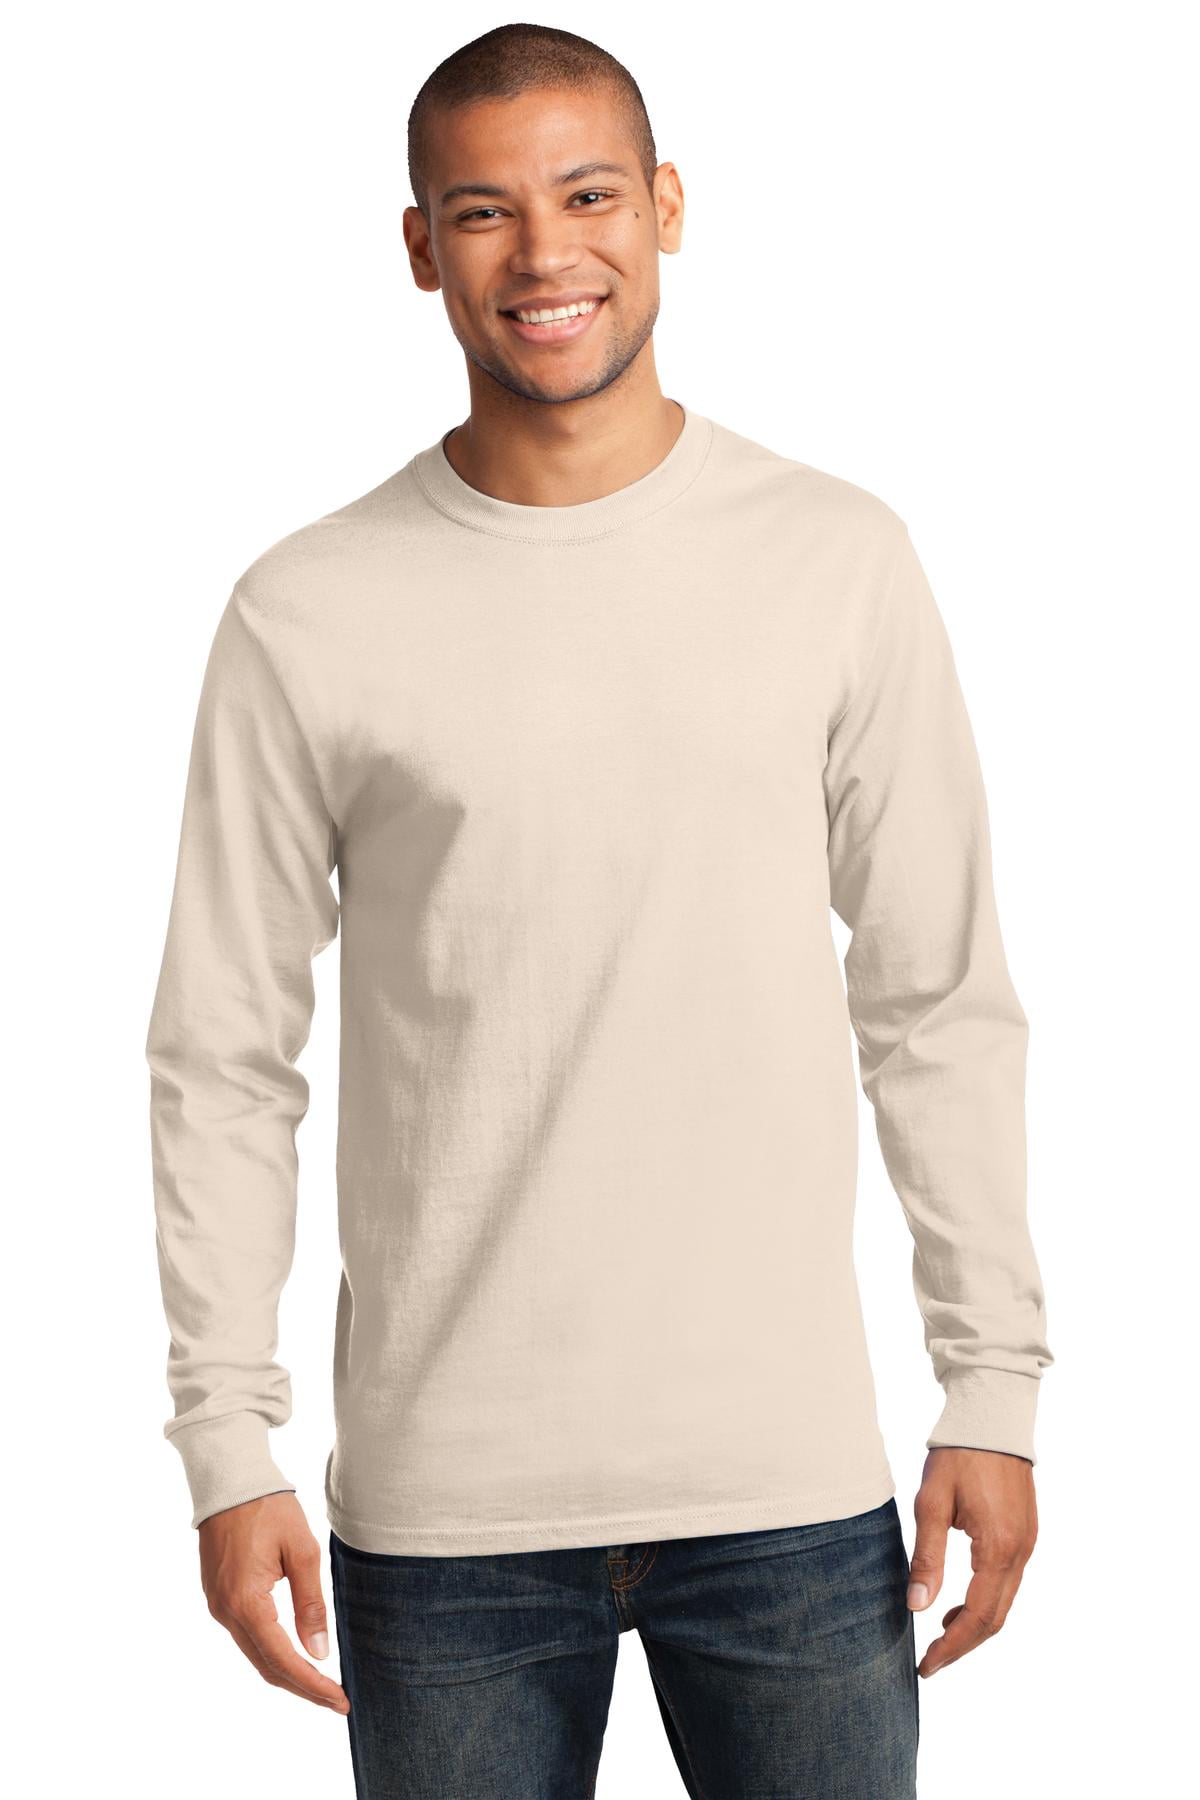 Port & Company Long Sleeve Essential T-Shirt. Natural. S.